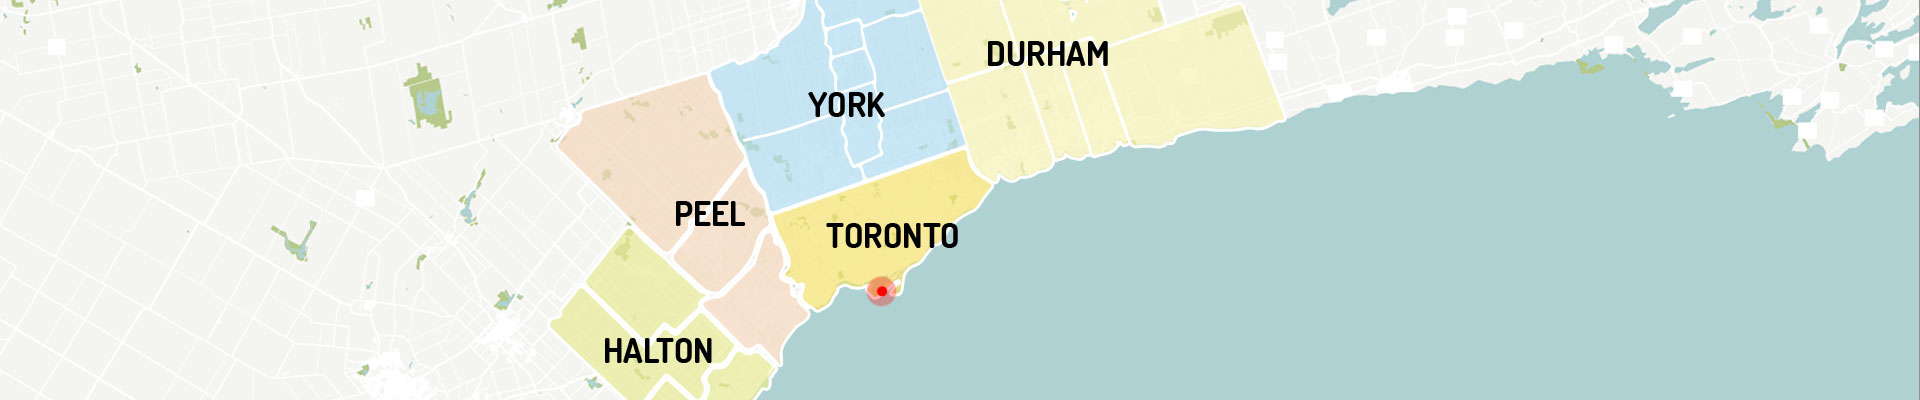 Map of Greater Toronto